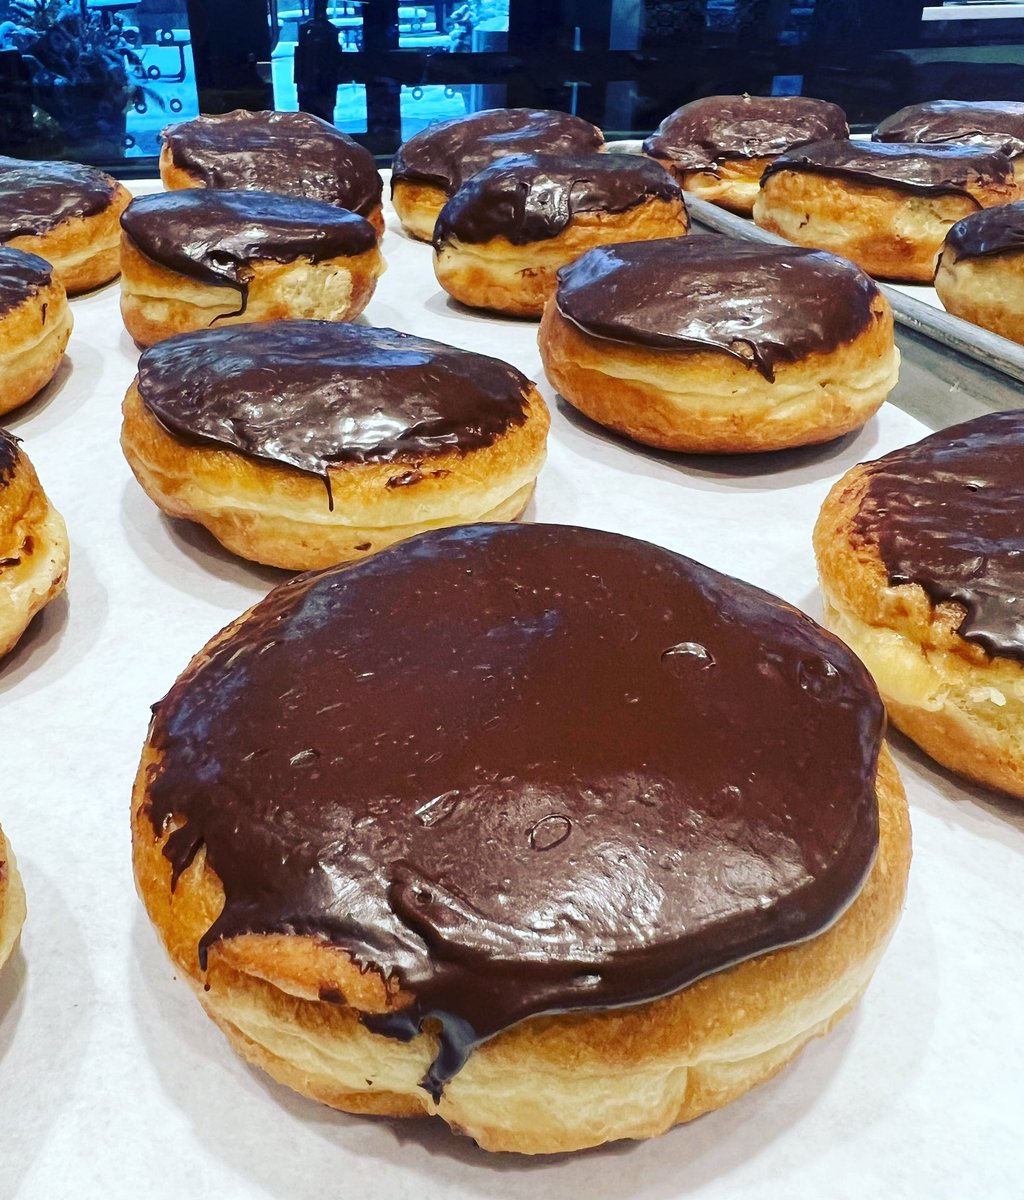 Kane’s Boston Cream Donuts!!! Need we say more about these perfect donuts? Get them delivered to your doorstep with @goldbelly #kanesdonuts #bostoncream #donutsarelove #bestofboston #donuts #chocolate #delicious #saugus #boston #massachusetts